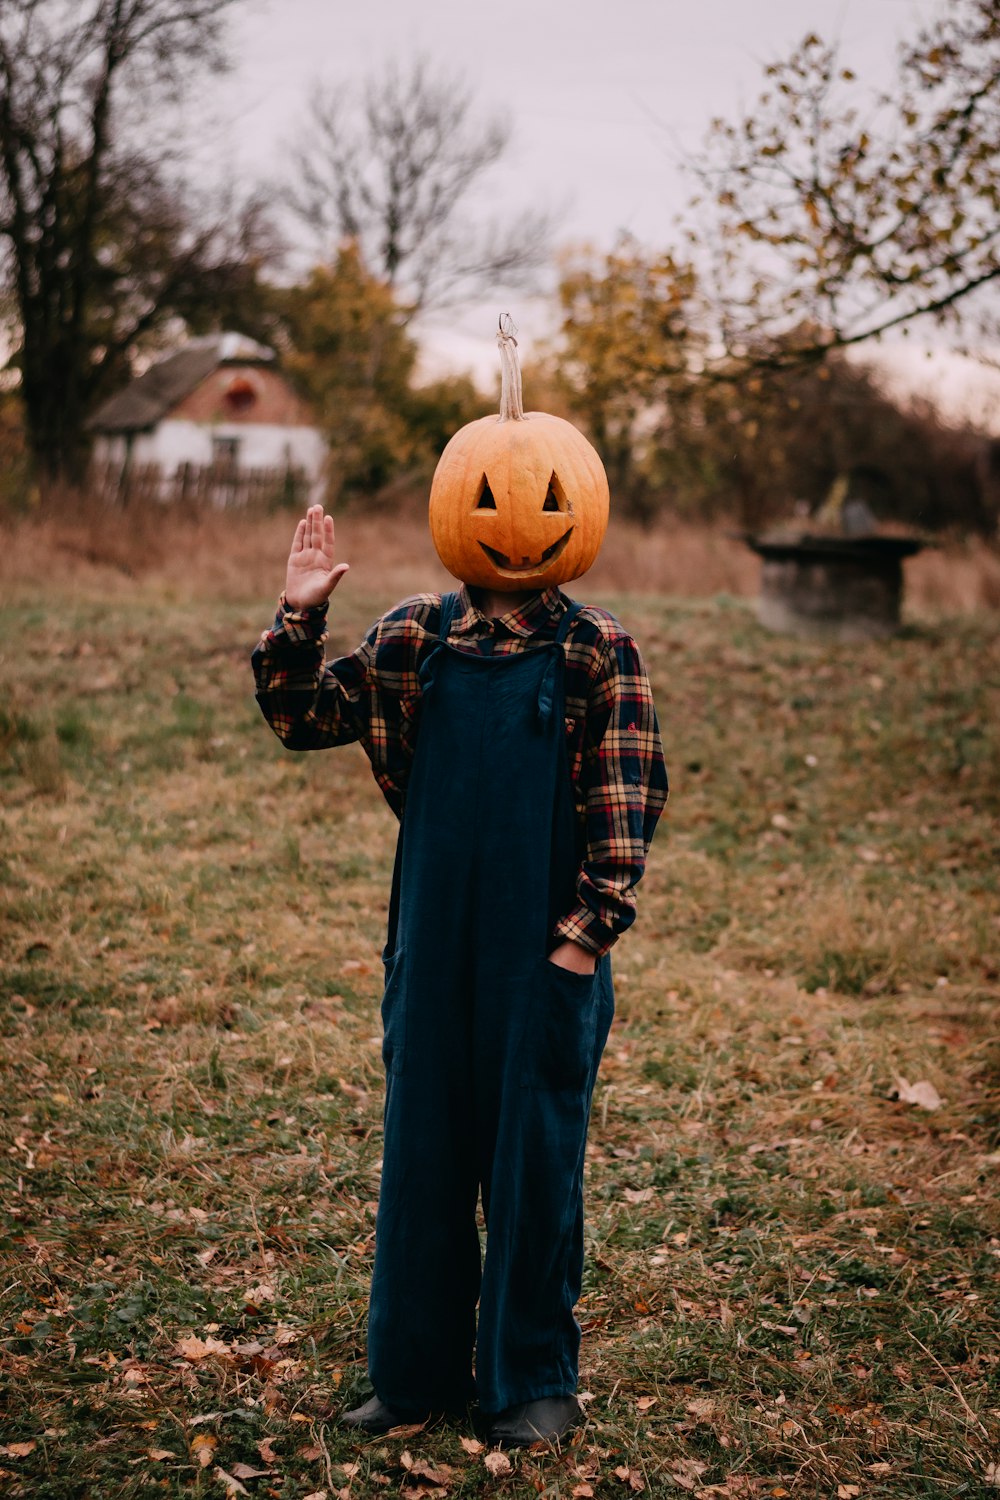 a young boy wearing a pumpkin head and overalls